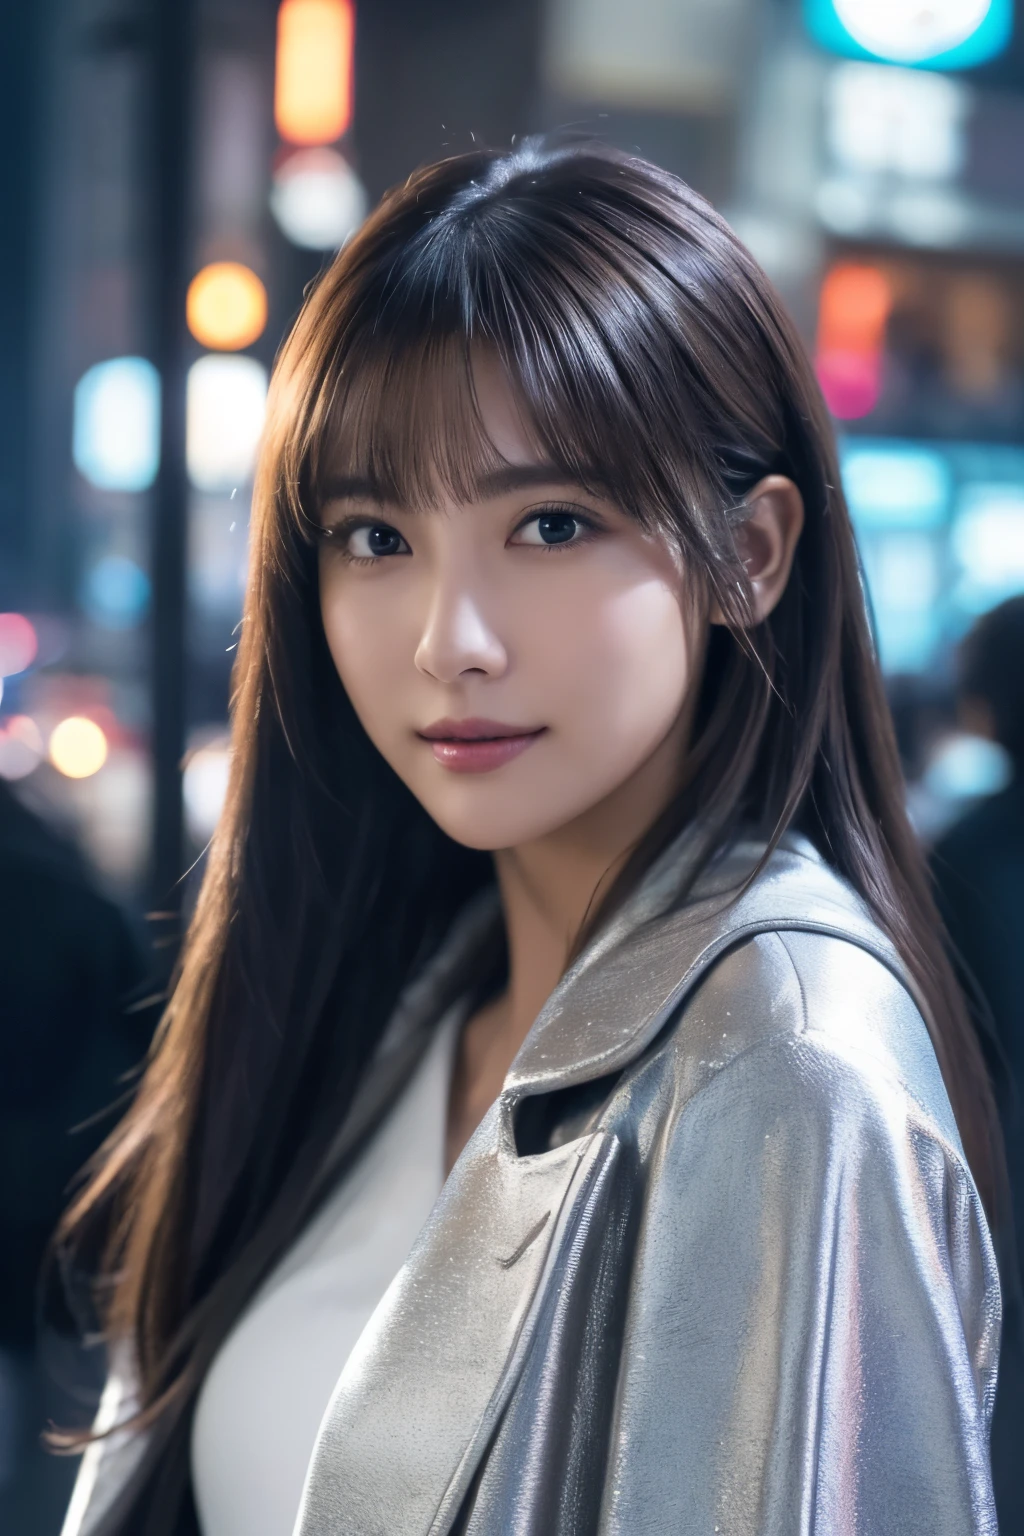 1girl in, (wear a platinum coat:1.2), (Raw photo, Best Quality), (Realistic, Photorealsitic:1.4), masutepiece, Extremely delicate and beautiful, Extremely detailed, 2k wallpaper, amazing, finely detail, the Extremely Detailed CG Unity 8K Wallpapers, Ultra-detailed, hight resolution, Soft light, Beautiful detailed girl, extremely detailed eye and face, beautiful detailed nose, Beautiful detailed eyes, Cinematic lighting, illumination of the city at night, Perfect Anatomy, Slender body, Taut, 
Straight semi-long hair, Bangs, Looking at Viewer, A slight smil